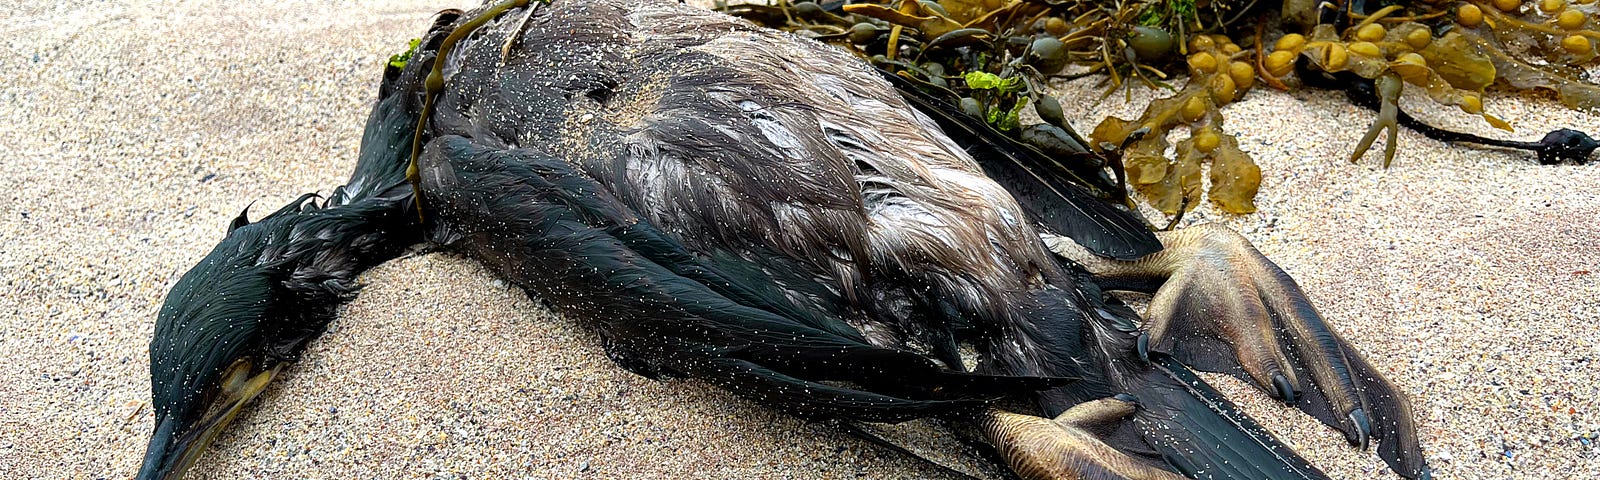 A wet, dead cormorant lies on a cream-ochre sand beach next to a small pile of mustard-green wrack seaweed, its webbed feet stick up from black tail feathers and grey-brown breast, the head and neck are at right angle to the bird